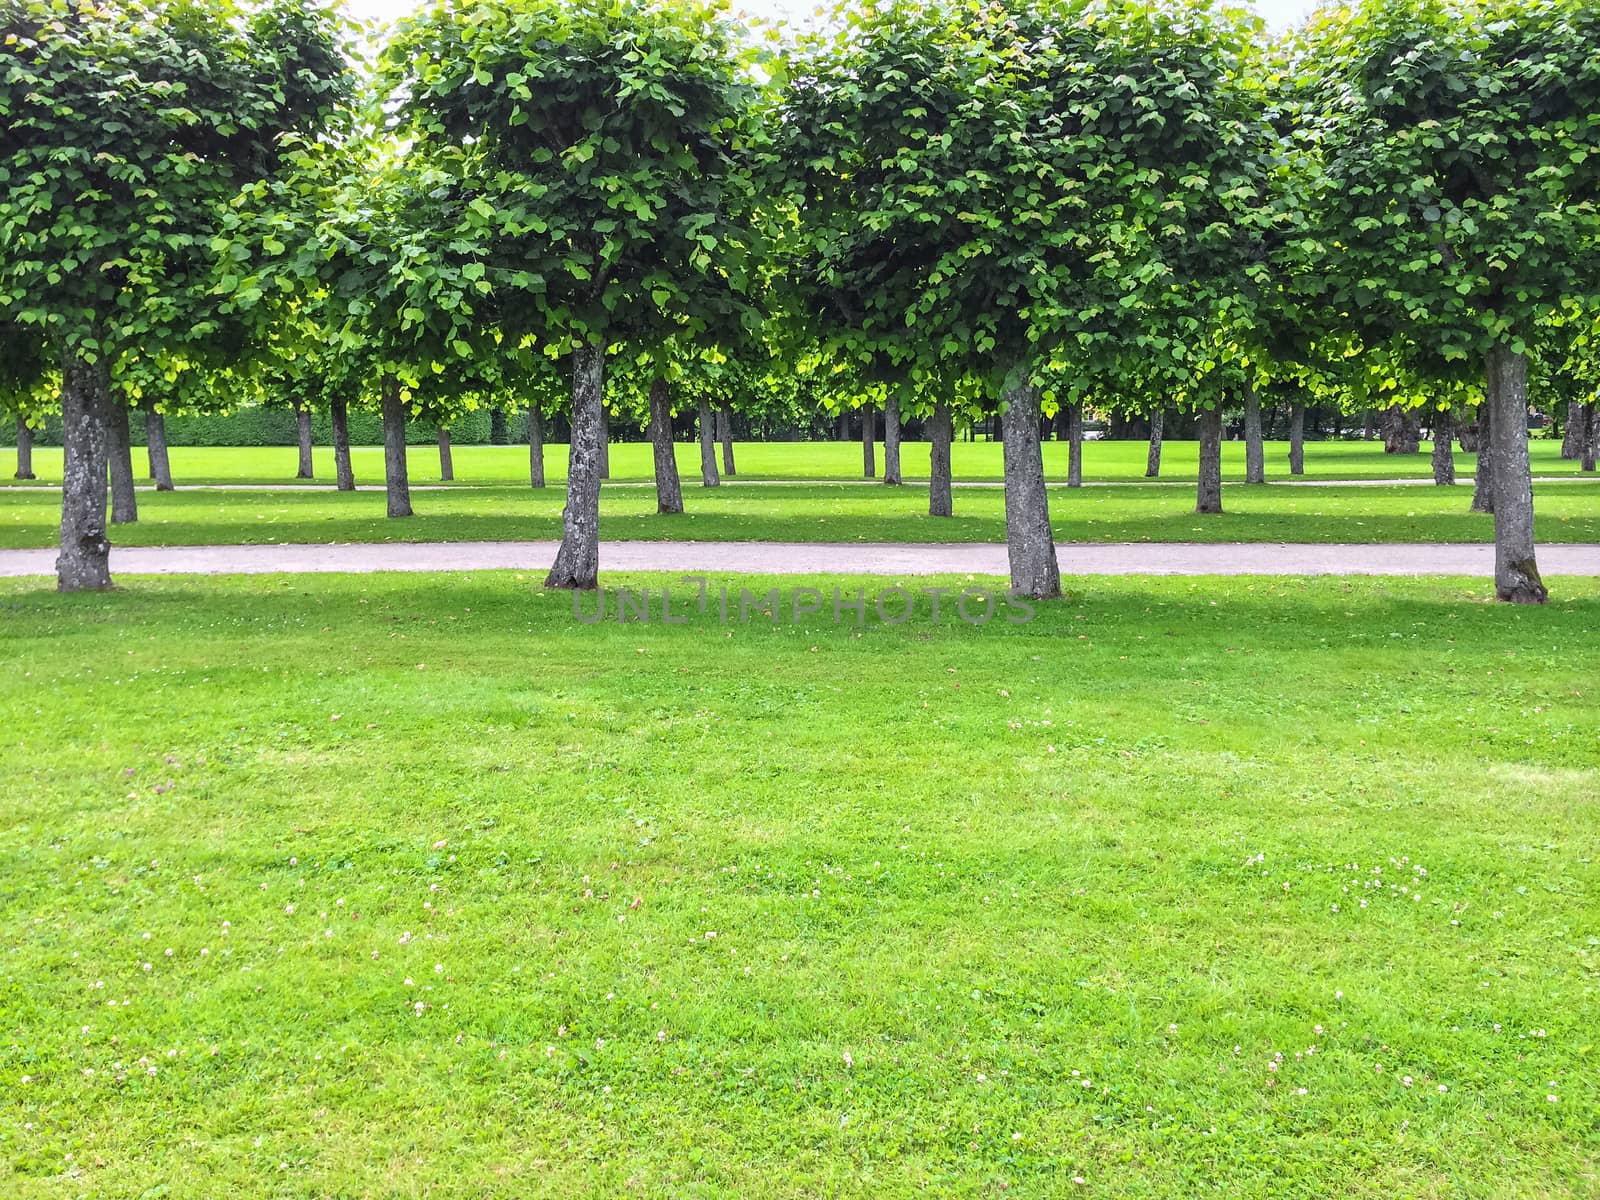 Beautiful linden trees and green lawn in the summer park.